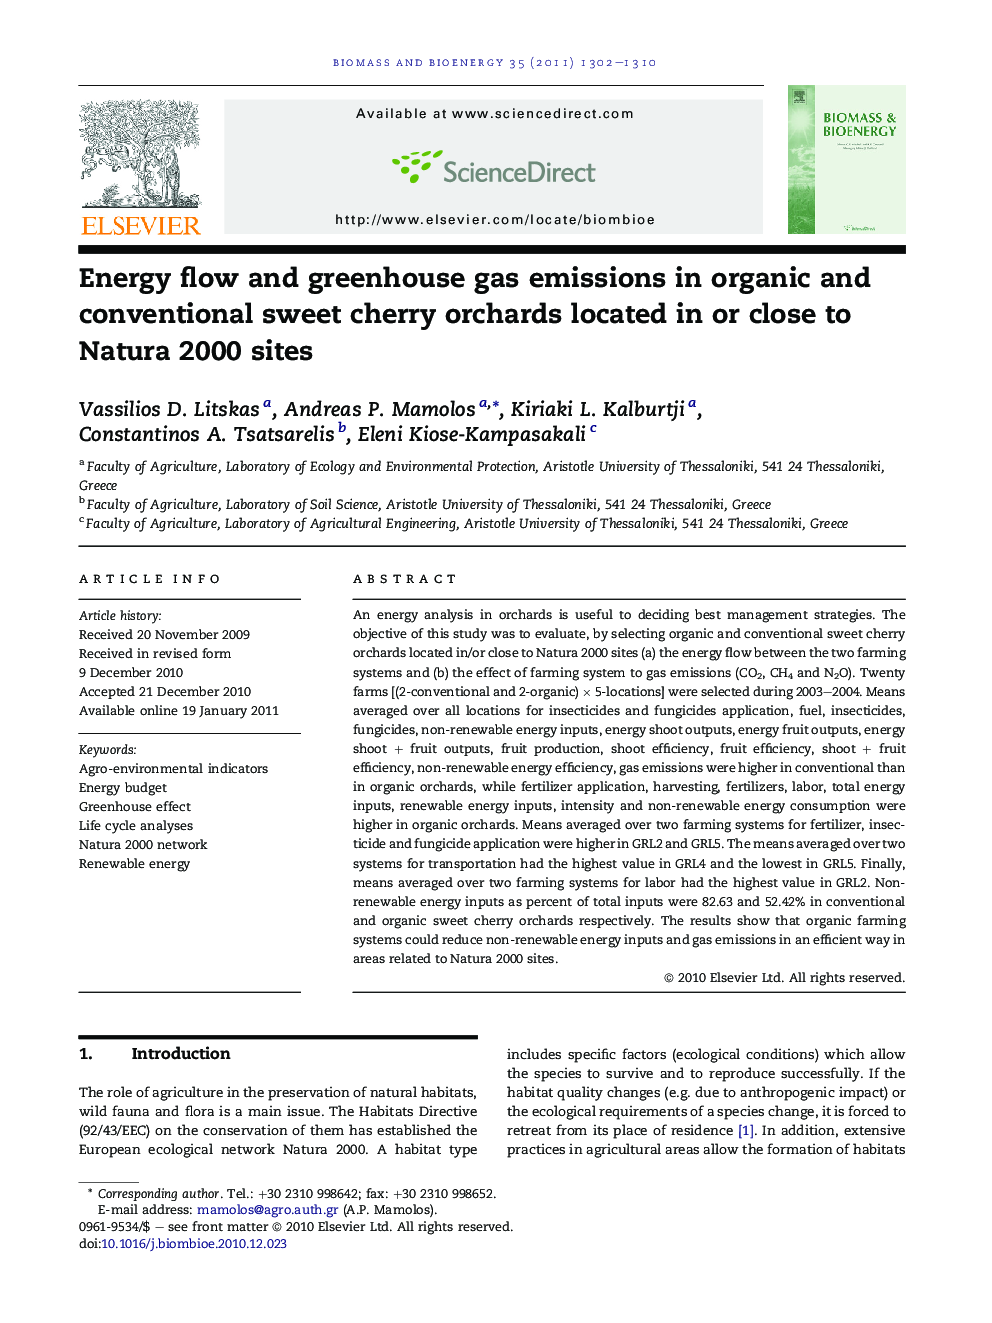 Energy flow and greenhouse gas emissions in organic and conventional sweet cherry orchards located in or close to Natura 2000 sites